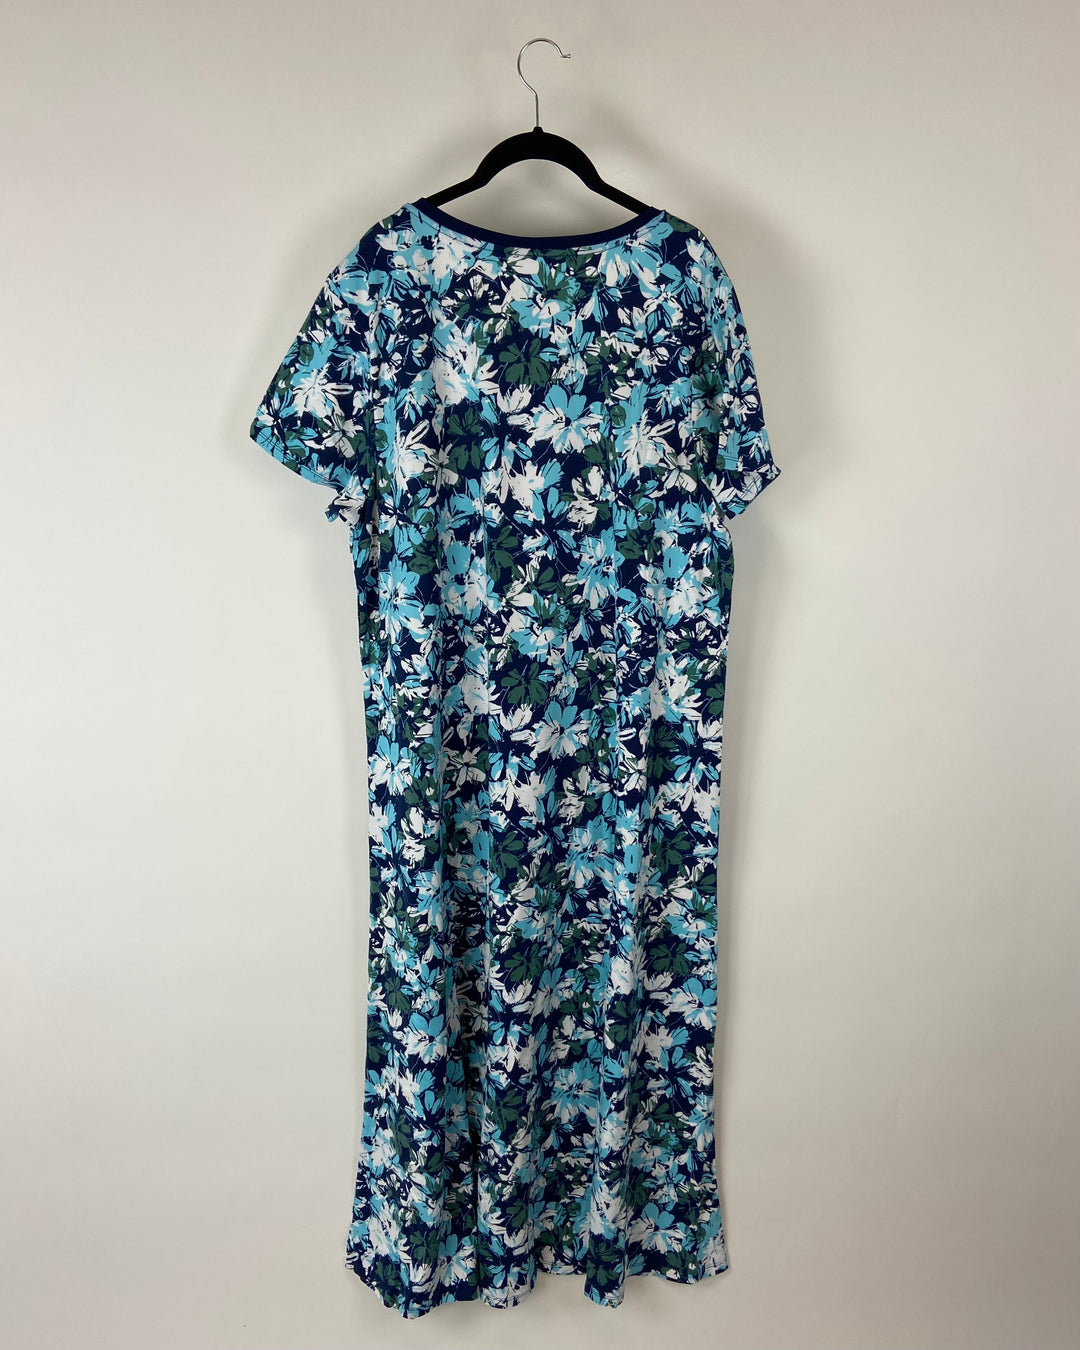 Blue and Green Floral Maxi Dress - Size 2/4, 6/8/ and 18/20